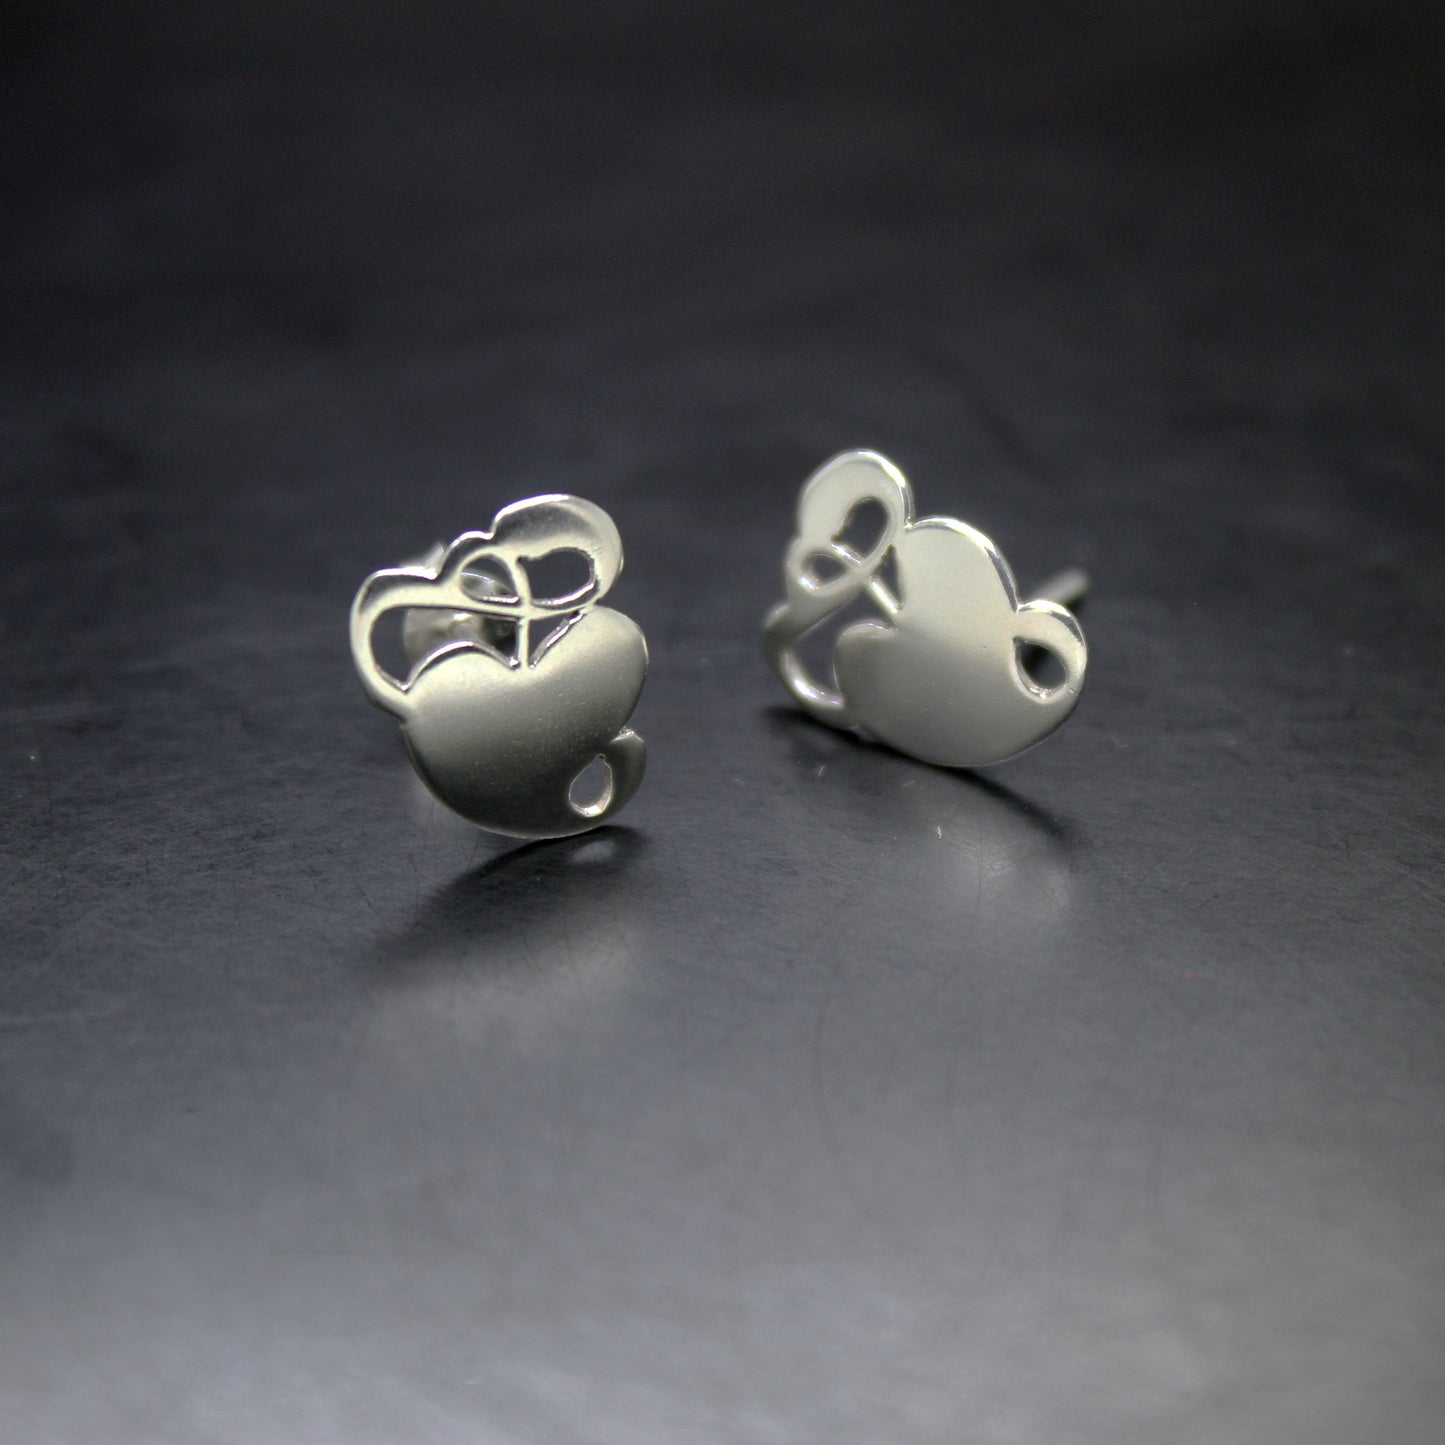 Hedera distinguishes earrings in 925 silver